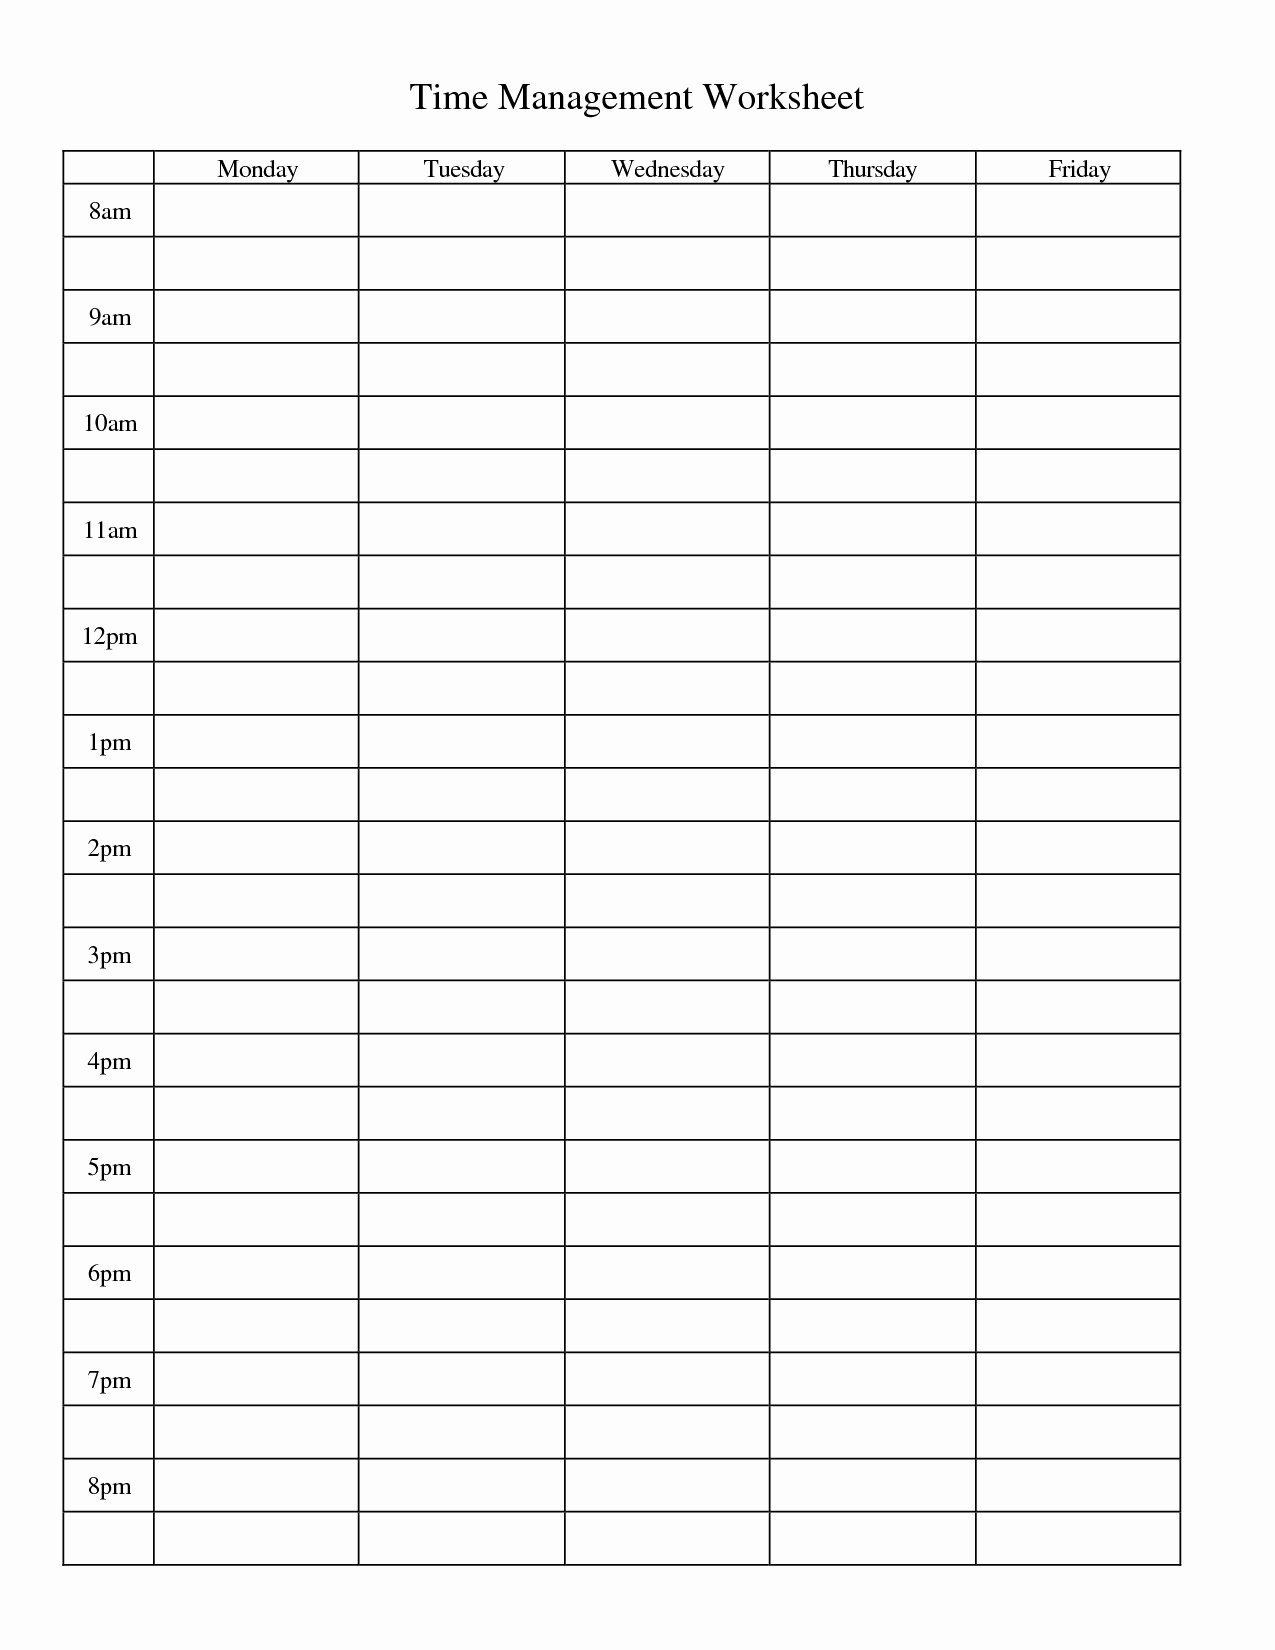 Time Management Sheet Template Best Of Time Management Sheet Template Timeline Spreadshee Daily